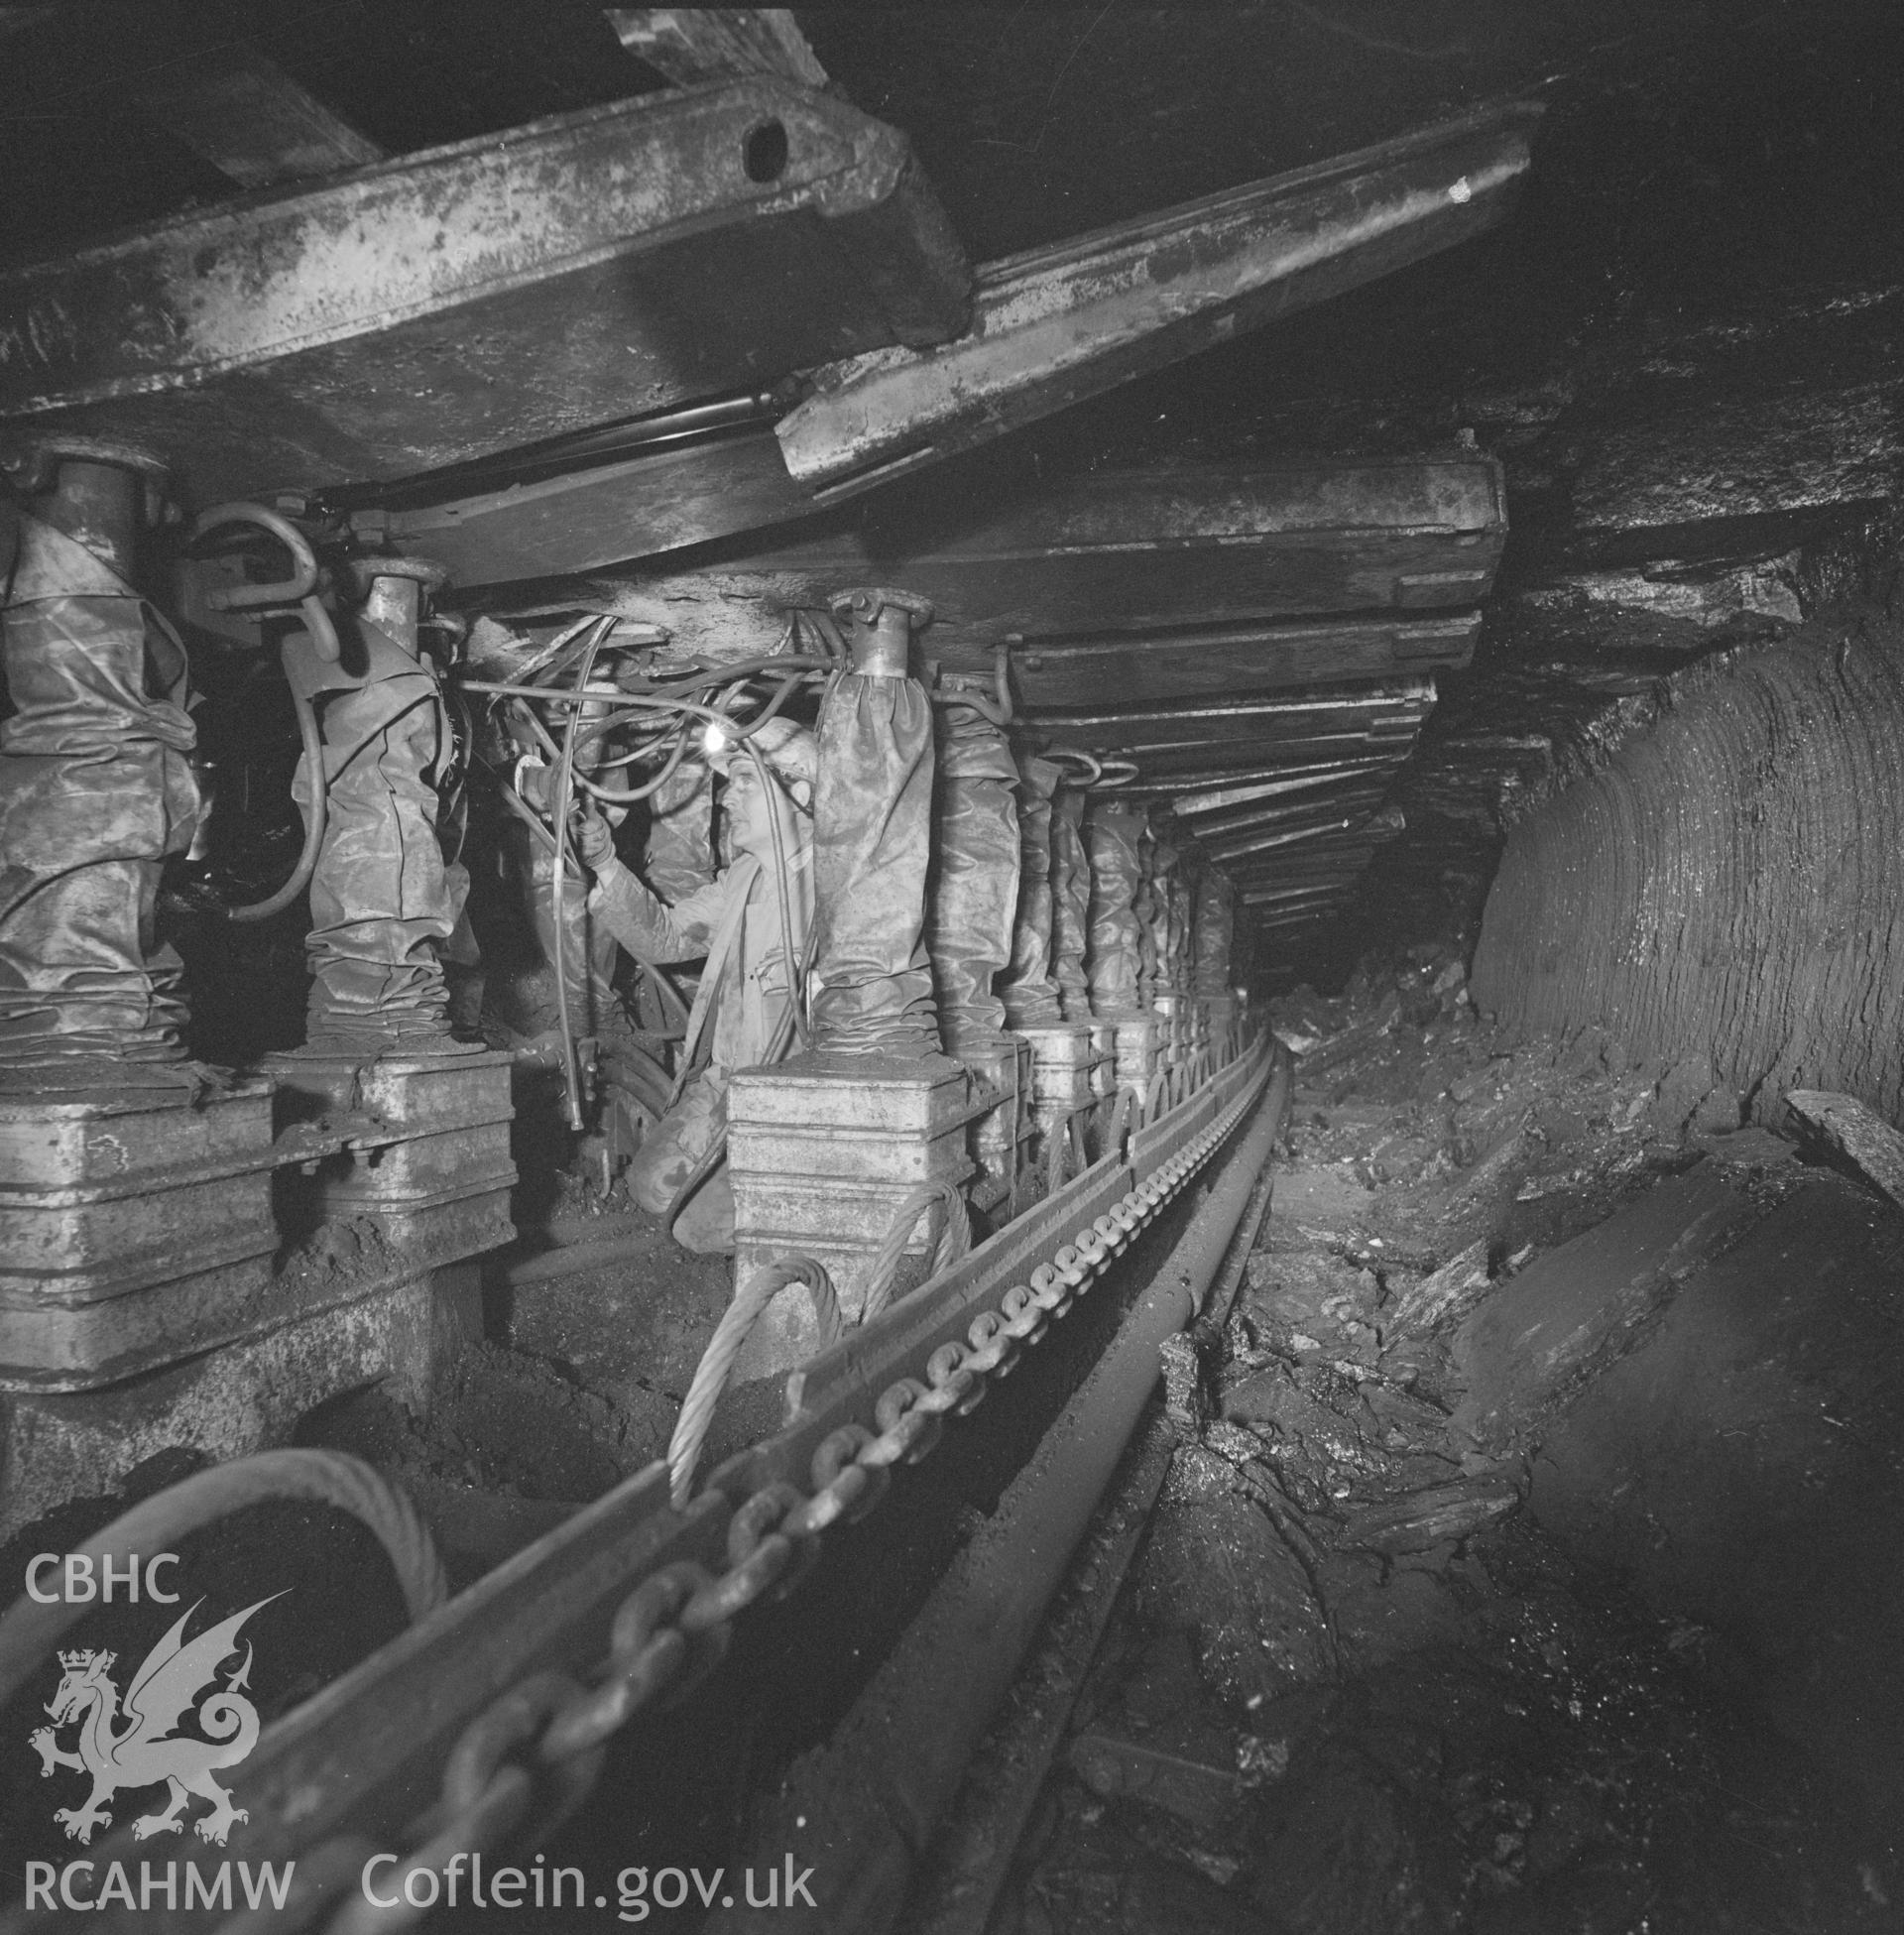 Digital copy of an acetate negative showing collier working on hydraulic roof supports at Oakdale Colliery, from the John Cornwell Collection.